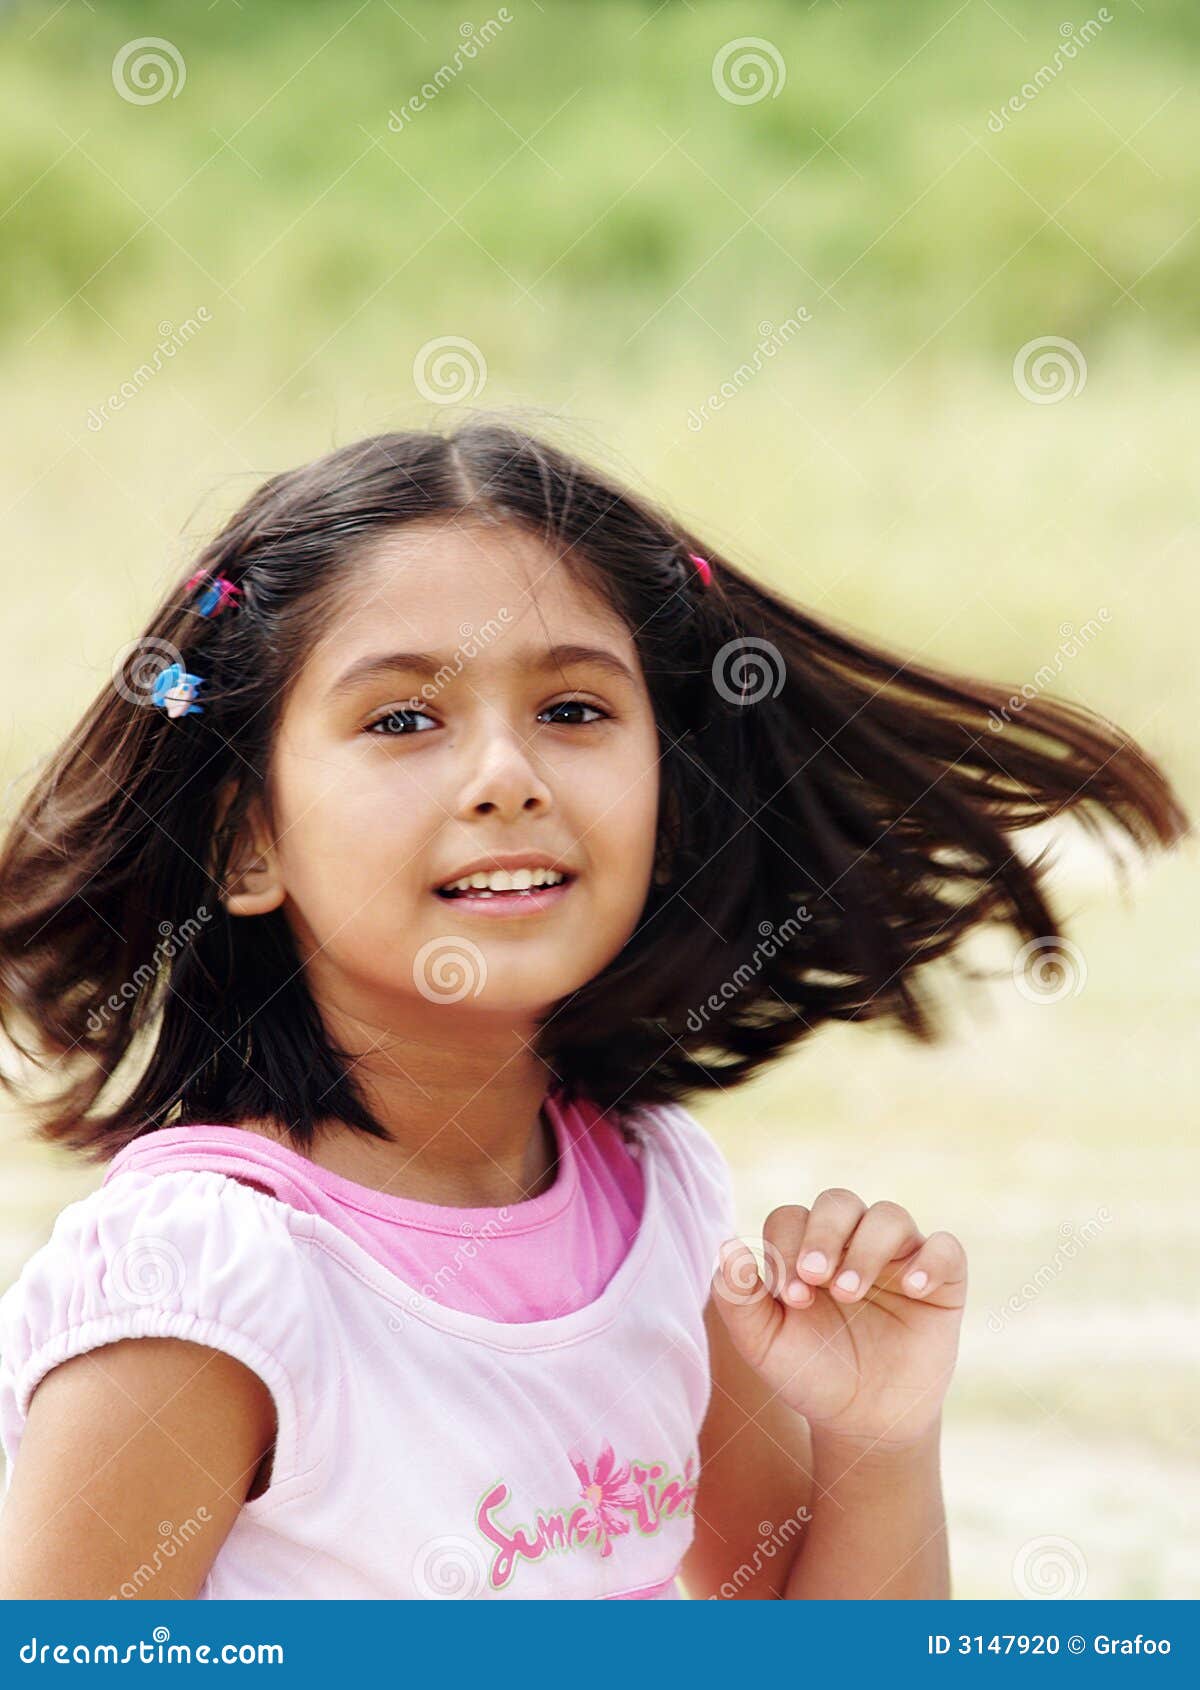 Girl with swinging hair stock photo. Image of grin, girl - 3147920